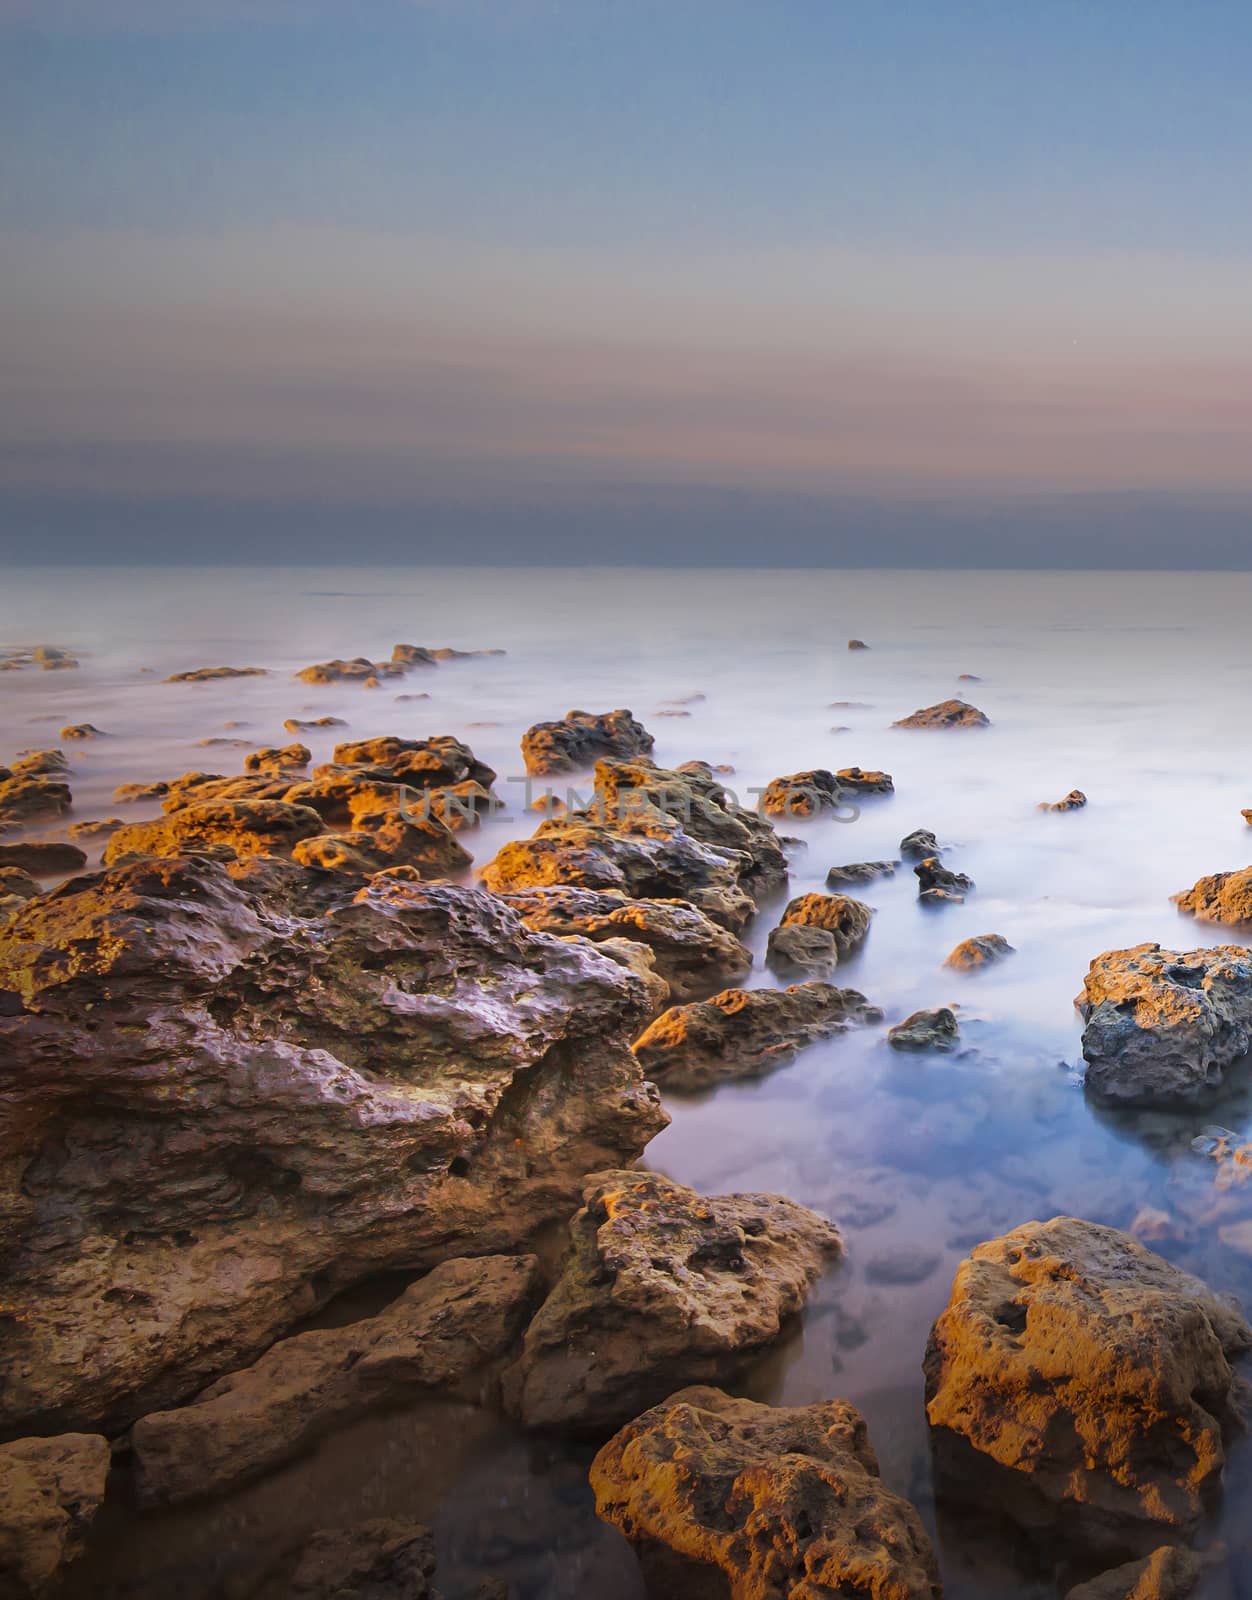 View of a winter Sea and rocks. Long exposure shot.